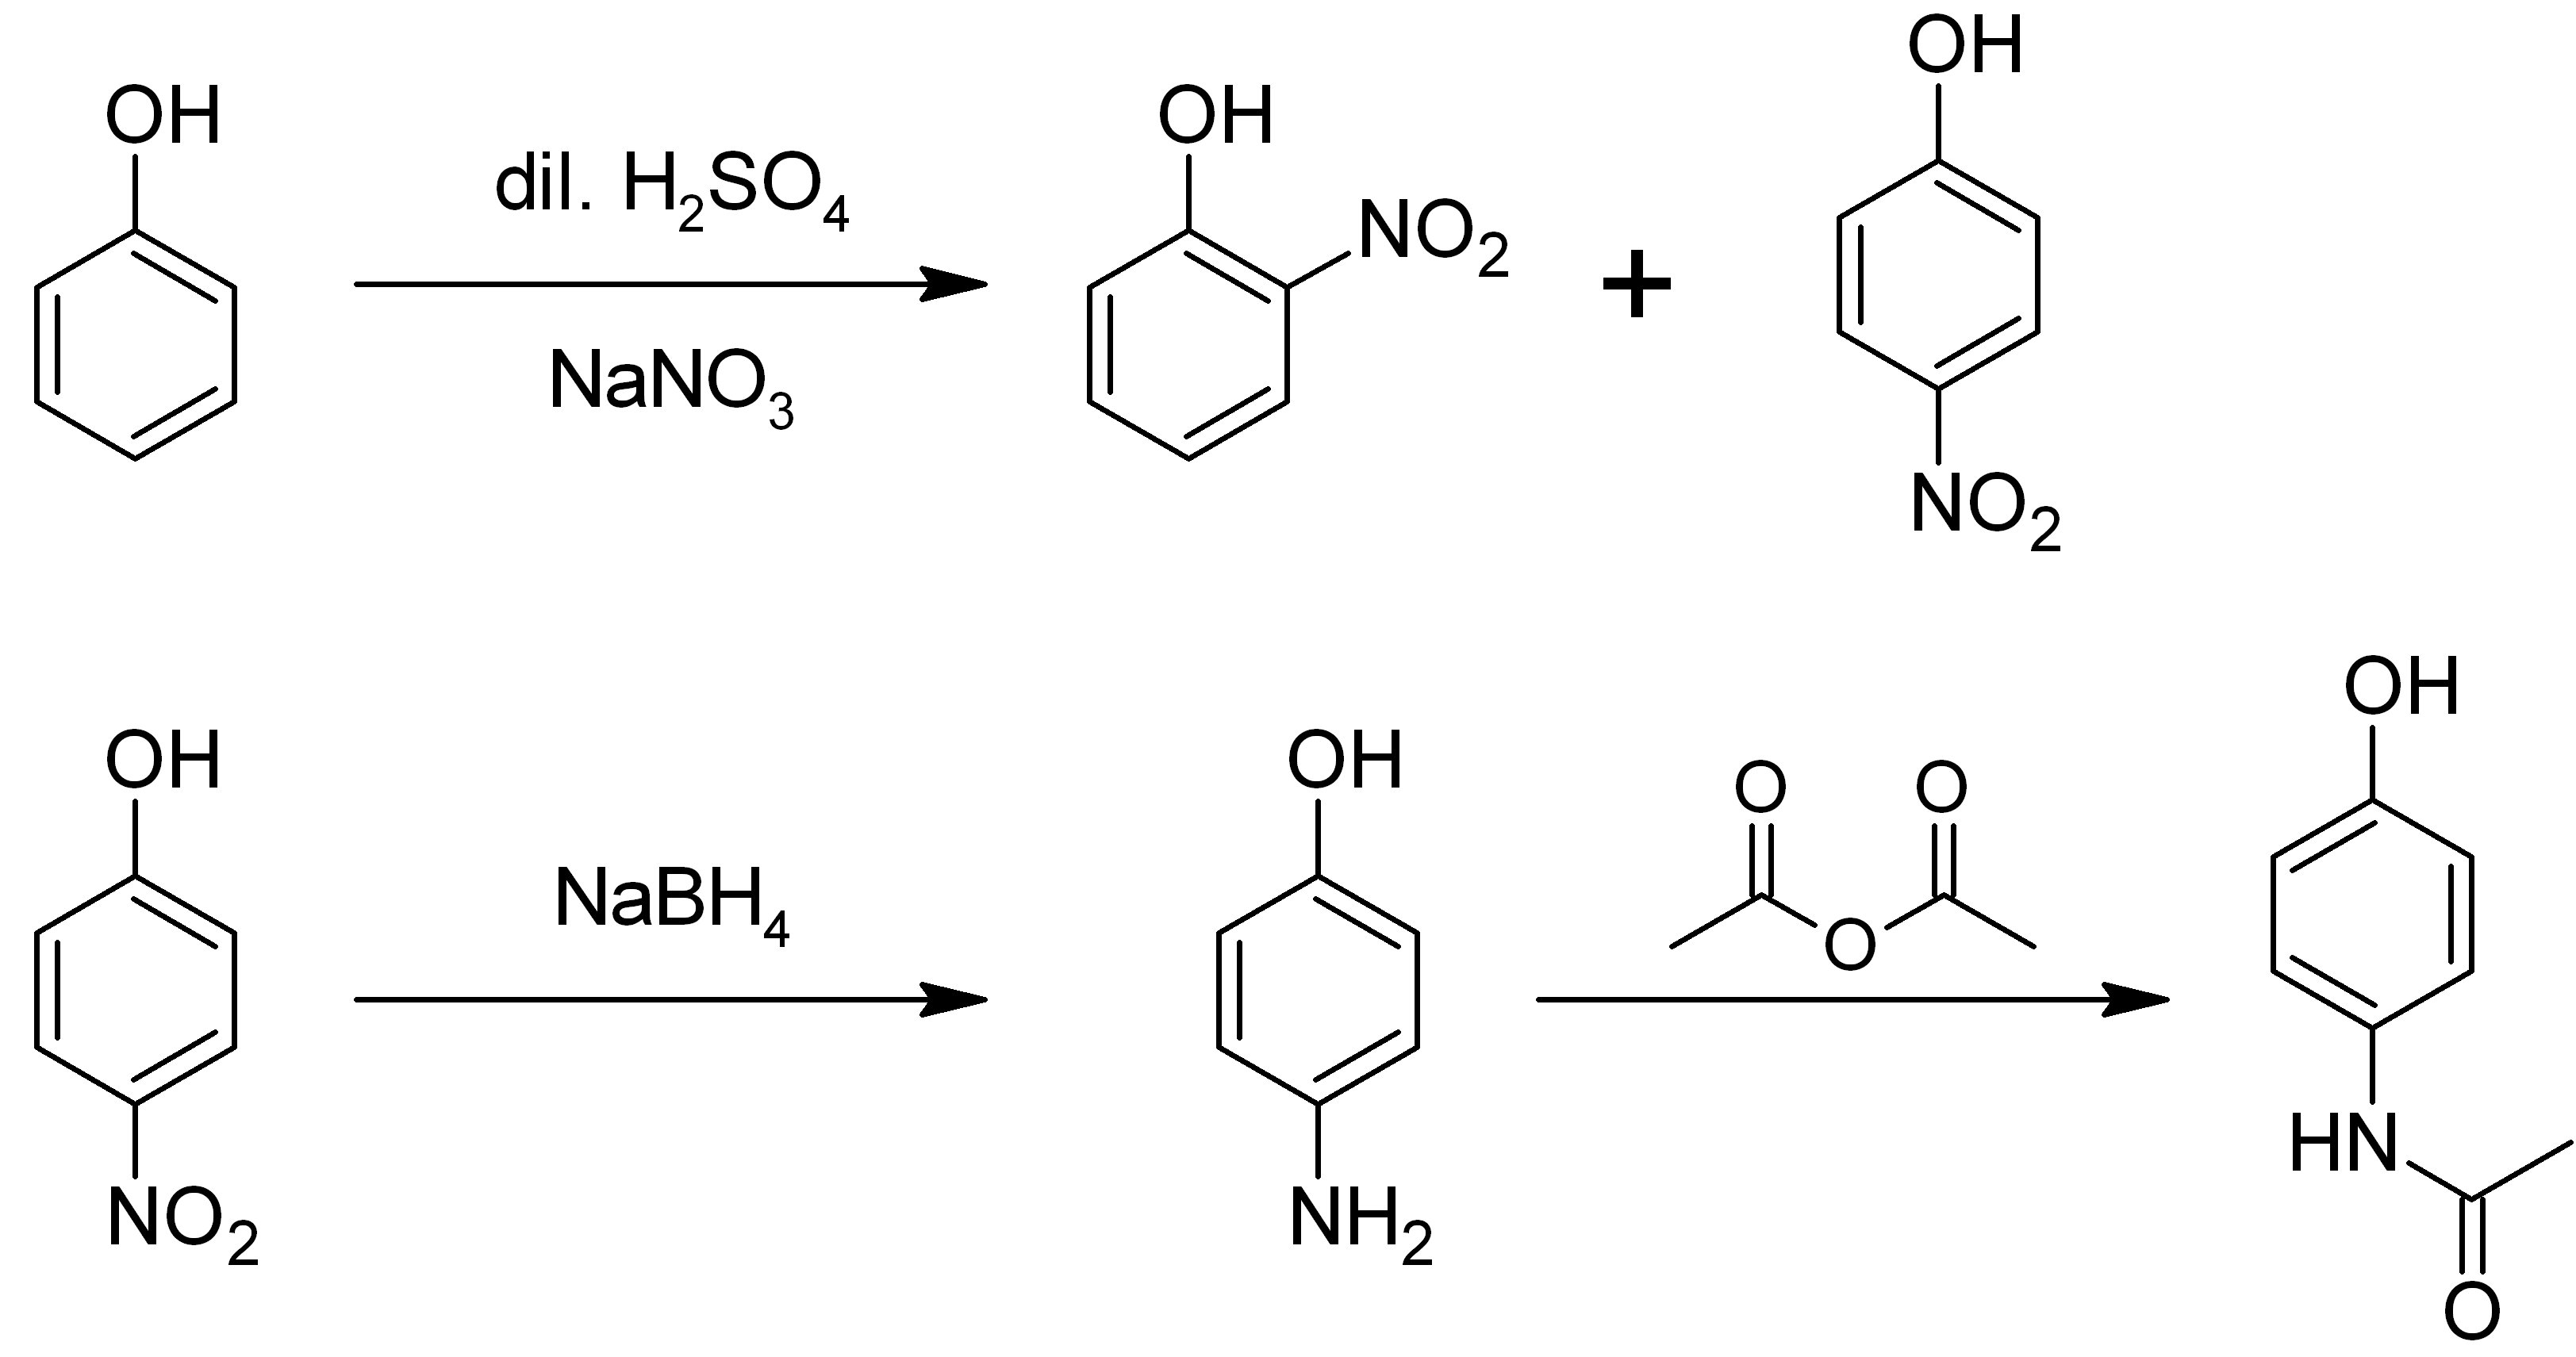 The overall reaction mechanis